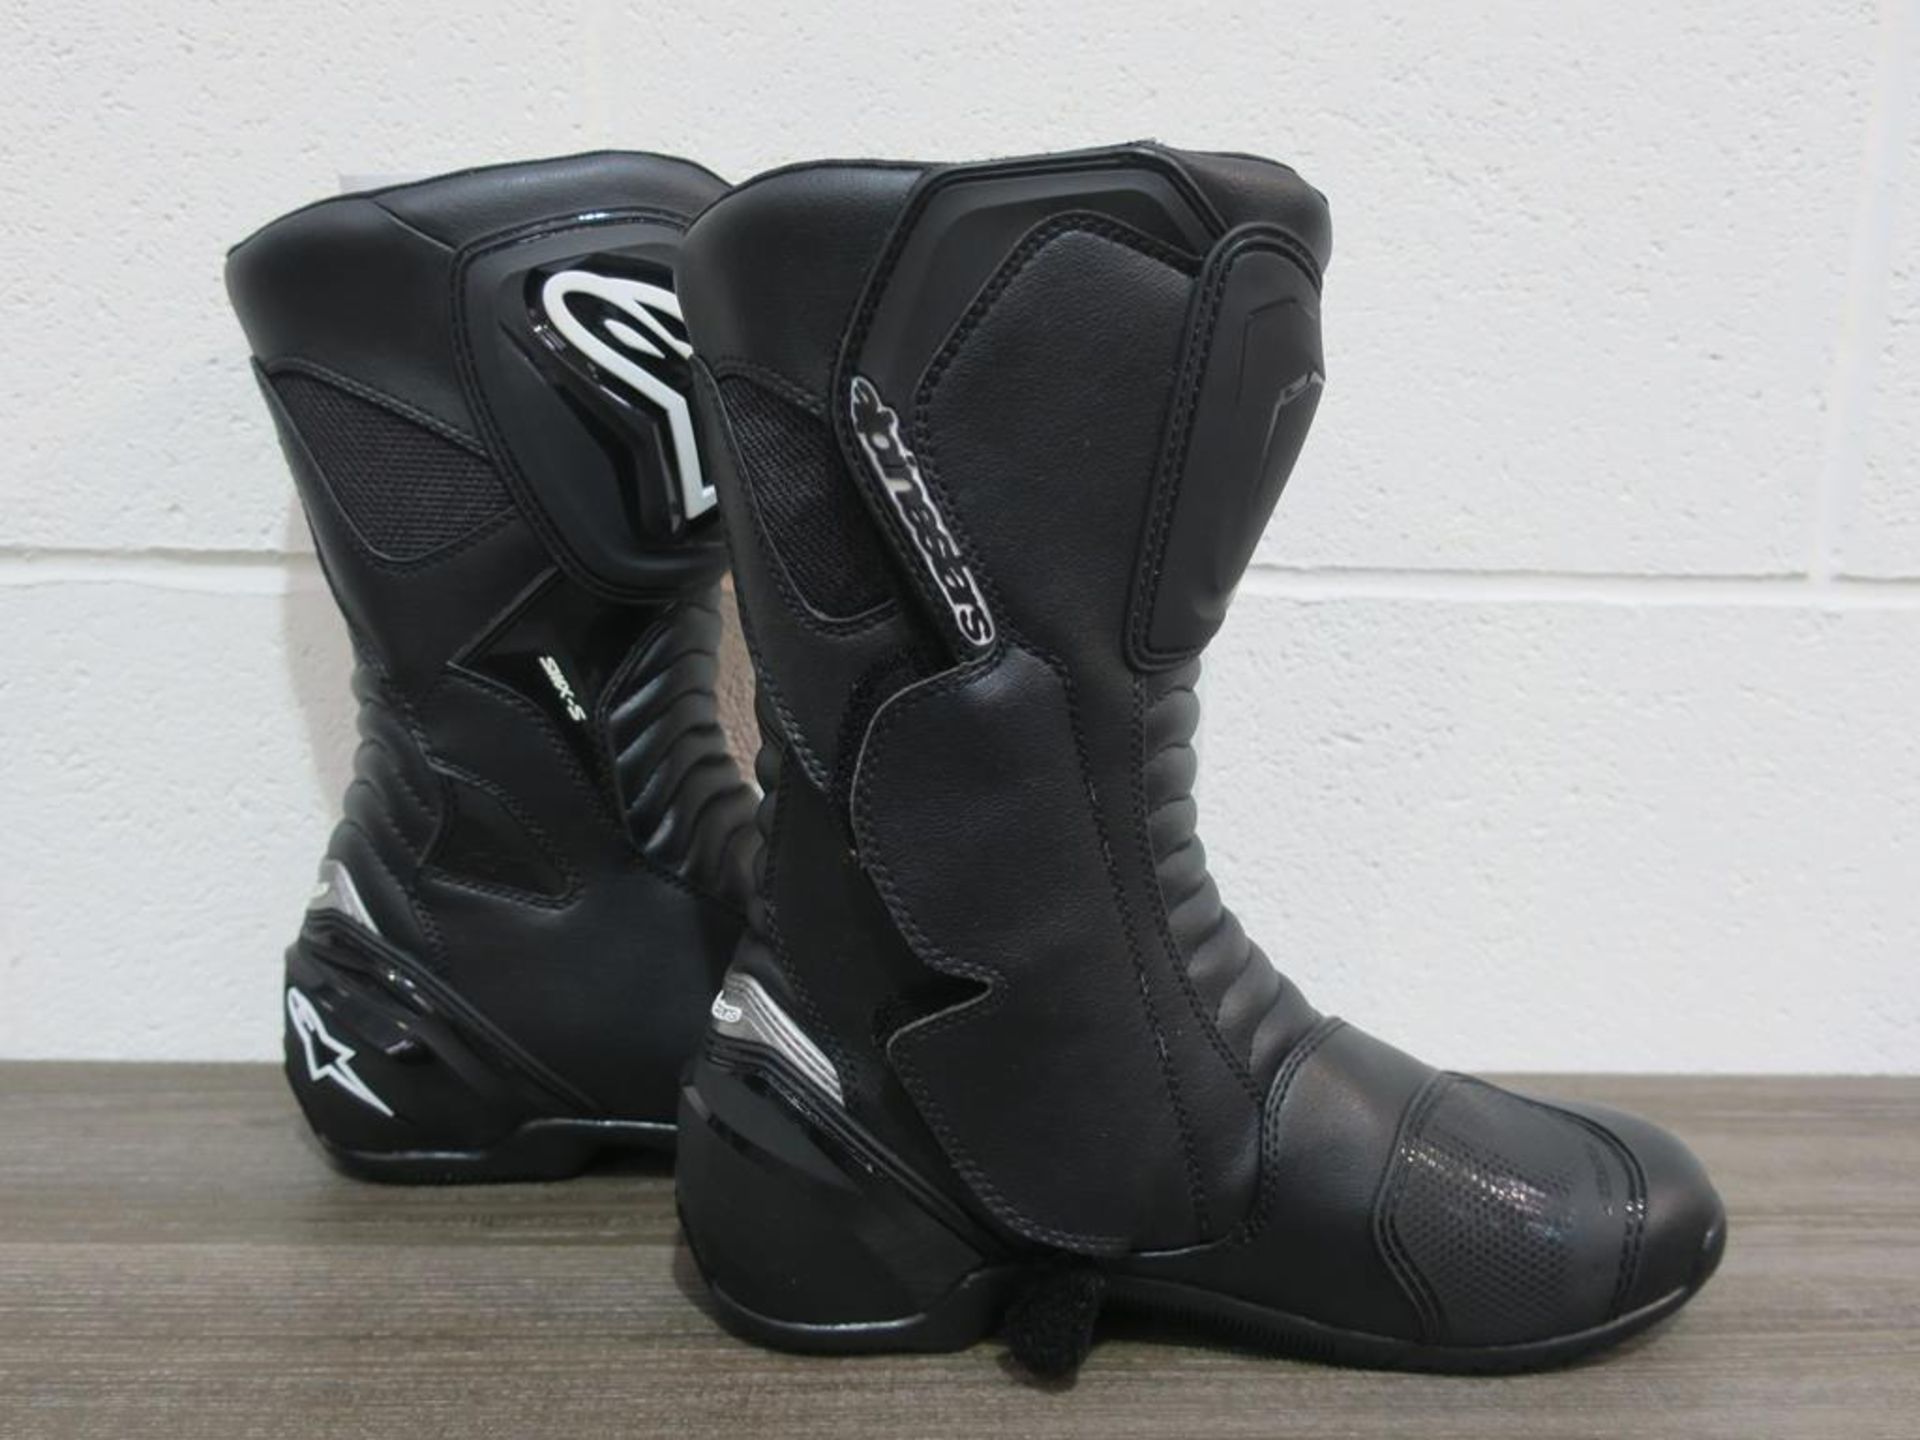 * AlpineStars SMX-S Black Boots Euro Size 43 (RRP £169.99) - Image 3 of 4